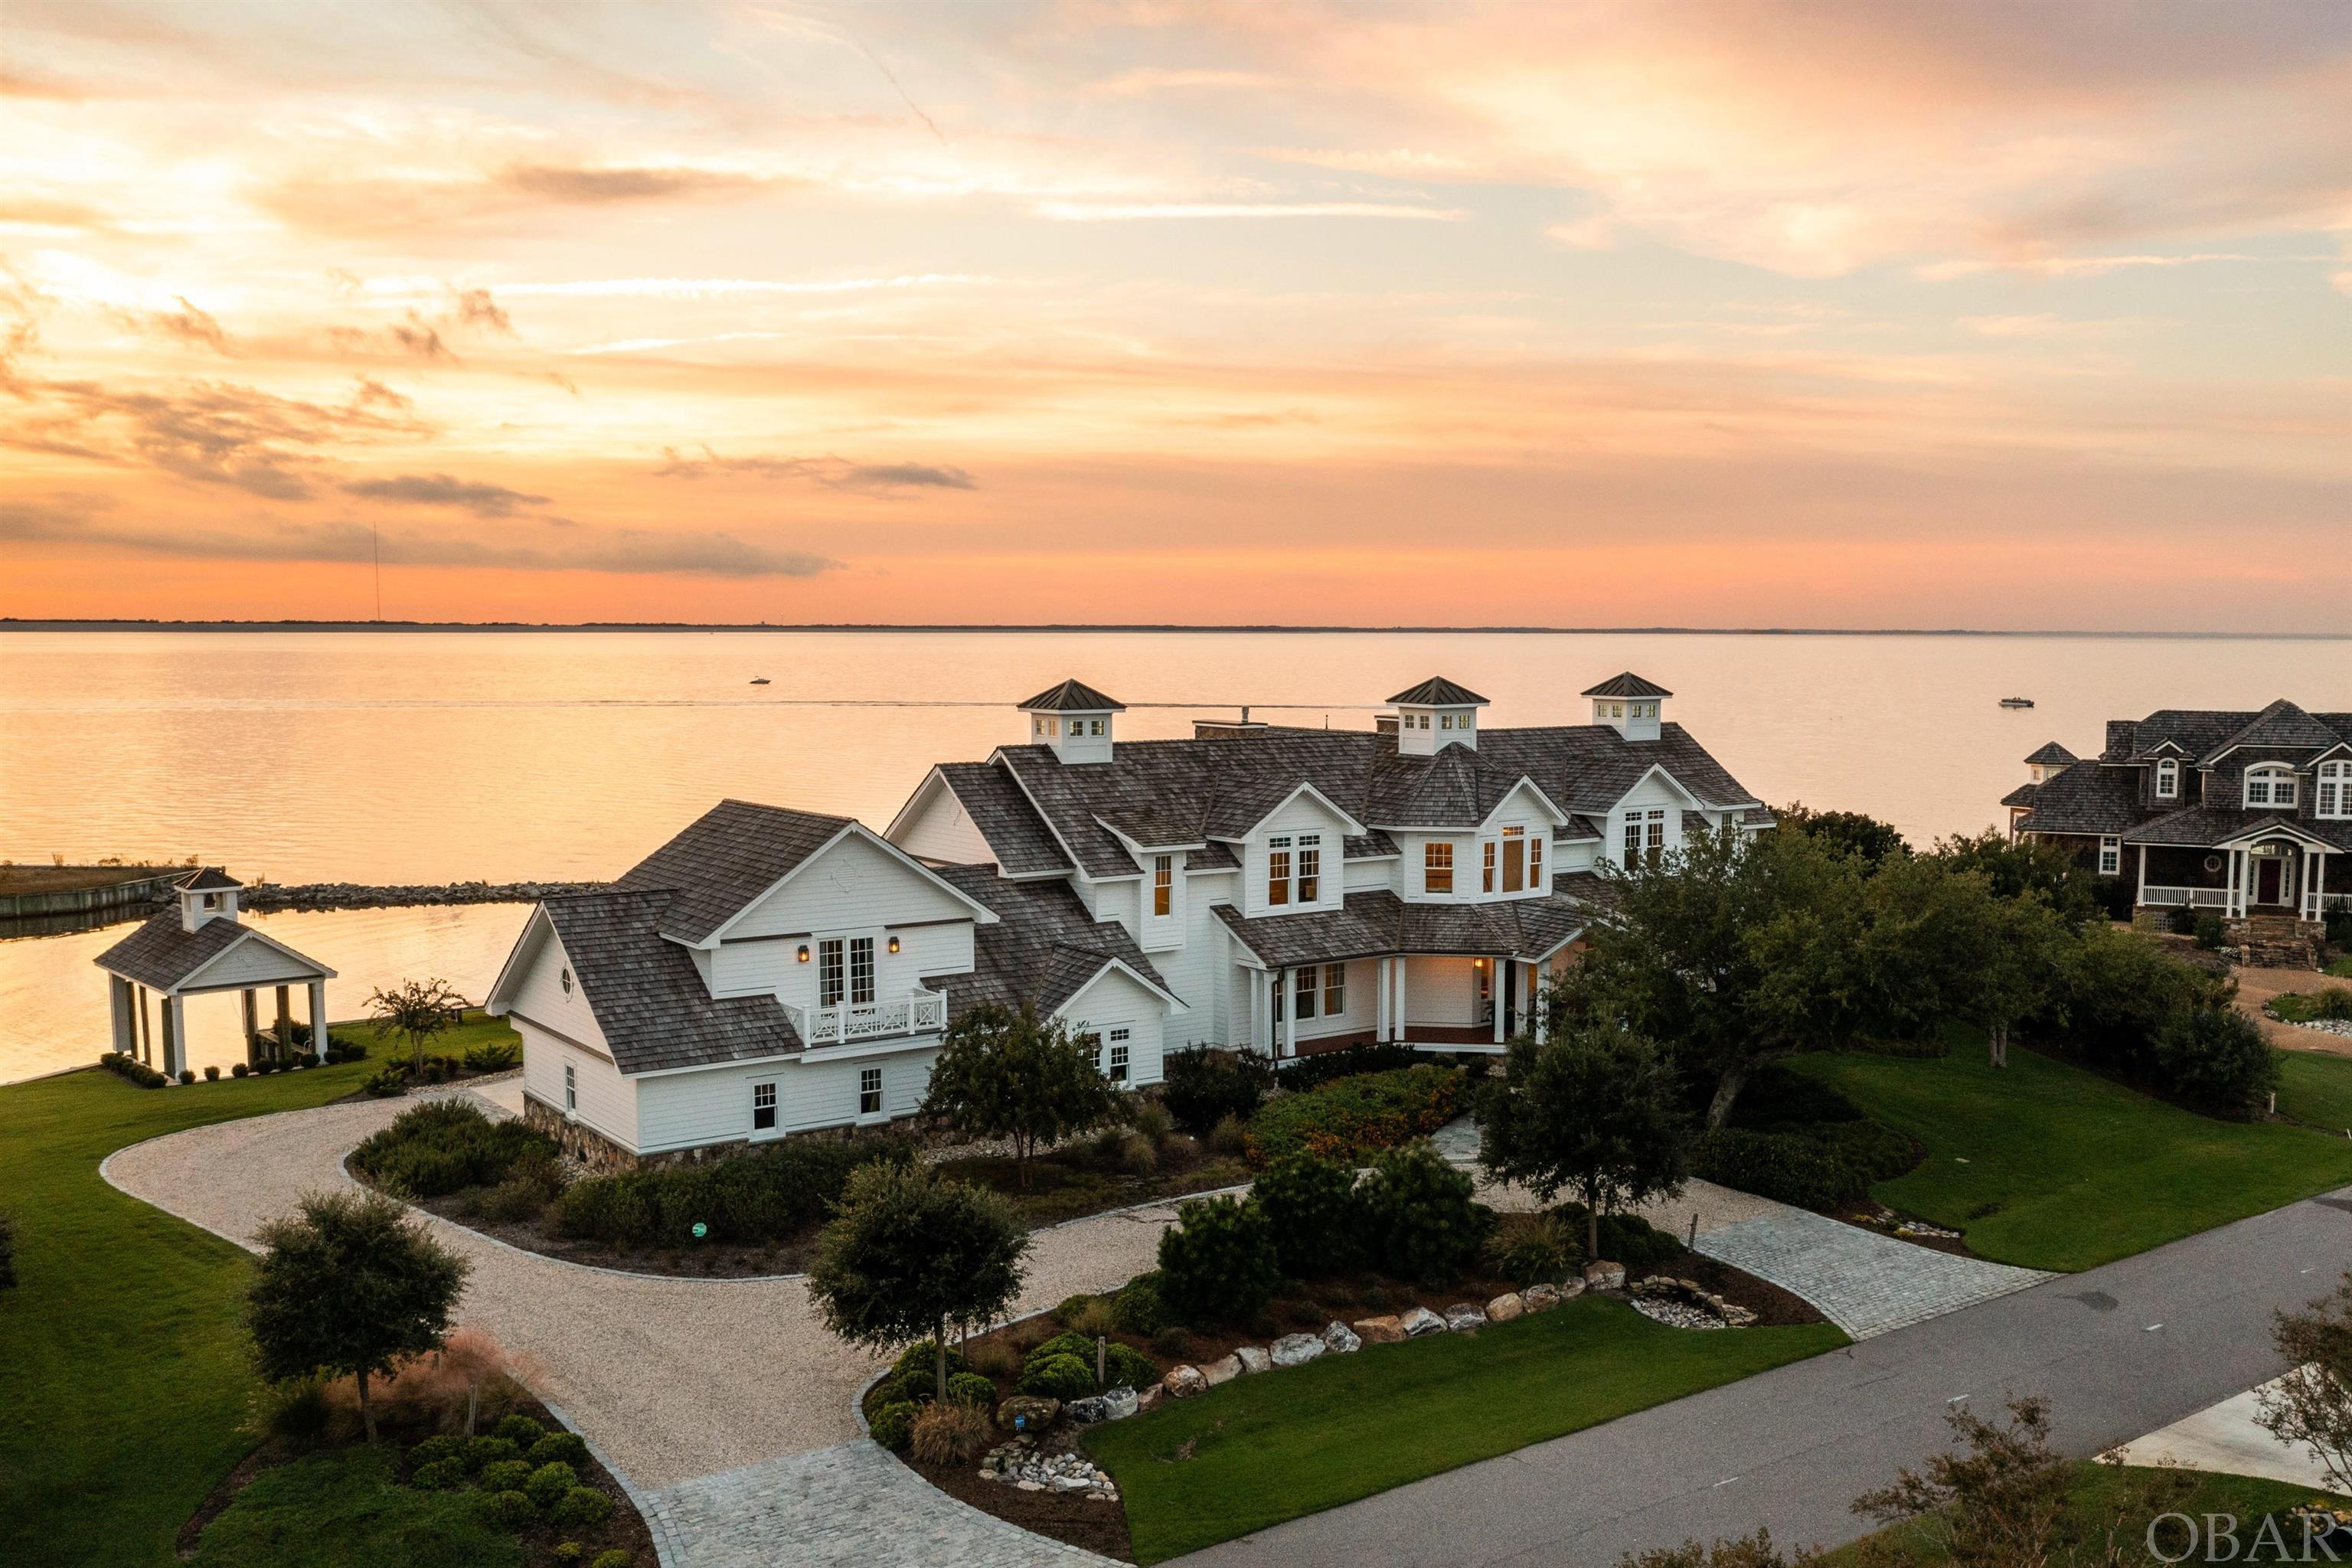 Mill Point is one of the finest primary residential properties on the Outer Banks. The home sits high on a ridge overlooking its own harbor and offering uninterrupted panoramic views of the Currituck Sound. This is the only home on Gallop Harbor, and it boasts a boathouse with belfry and bronze bell, 430 feet of direct waterfront, a 30’ flagpole, mature shrubbery and inground heated swimming pool and spa, with waterfall and accent features.  Situated on the northern tip of the Martin’s Point peninsula, this westward facing lot offers stunning water views from every room.  Croft Hall Design and the owners meticulously designed every aspect of the property, and Sandmark Custom Homes transformed their dream plans into reality.  From its classic architectural design with cupolas, decorative dentil molding, and copper accent flashing, to state-of-the-art modern conveniences, including an elevator, to provide step free access from the attached three car garage to both levels of the home.  Whimsical touches like secret doors in bookcases, and a spiral staircase to provide a short cut to the master bedroom, plus more traditional features including coffered ceilings, custom cabinetry and an inlaid compass rose design in the walnut flooring, complete the look of high quality and exceptional craftsmanship. Energy efficient geothermal heating and cooling, LED lighting and impact glass windows and doors throughout are just some of the features that will attract the discerning buyer. Despite very light use since its completion, the residence and grounds have been meticulously maintained.  For a complete list of features, specifications, and detailed floor plans, please contact your OBX Realtor. Pre-approval or proof of funds are required prior to viewing. Unique and special properties like this are rarely offered for sale on the Outer Banks. Here is a great opportunity to enjoy the best of the best in Outer Banks residential living!